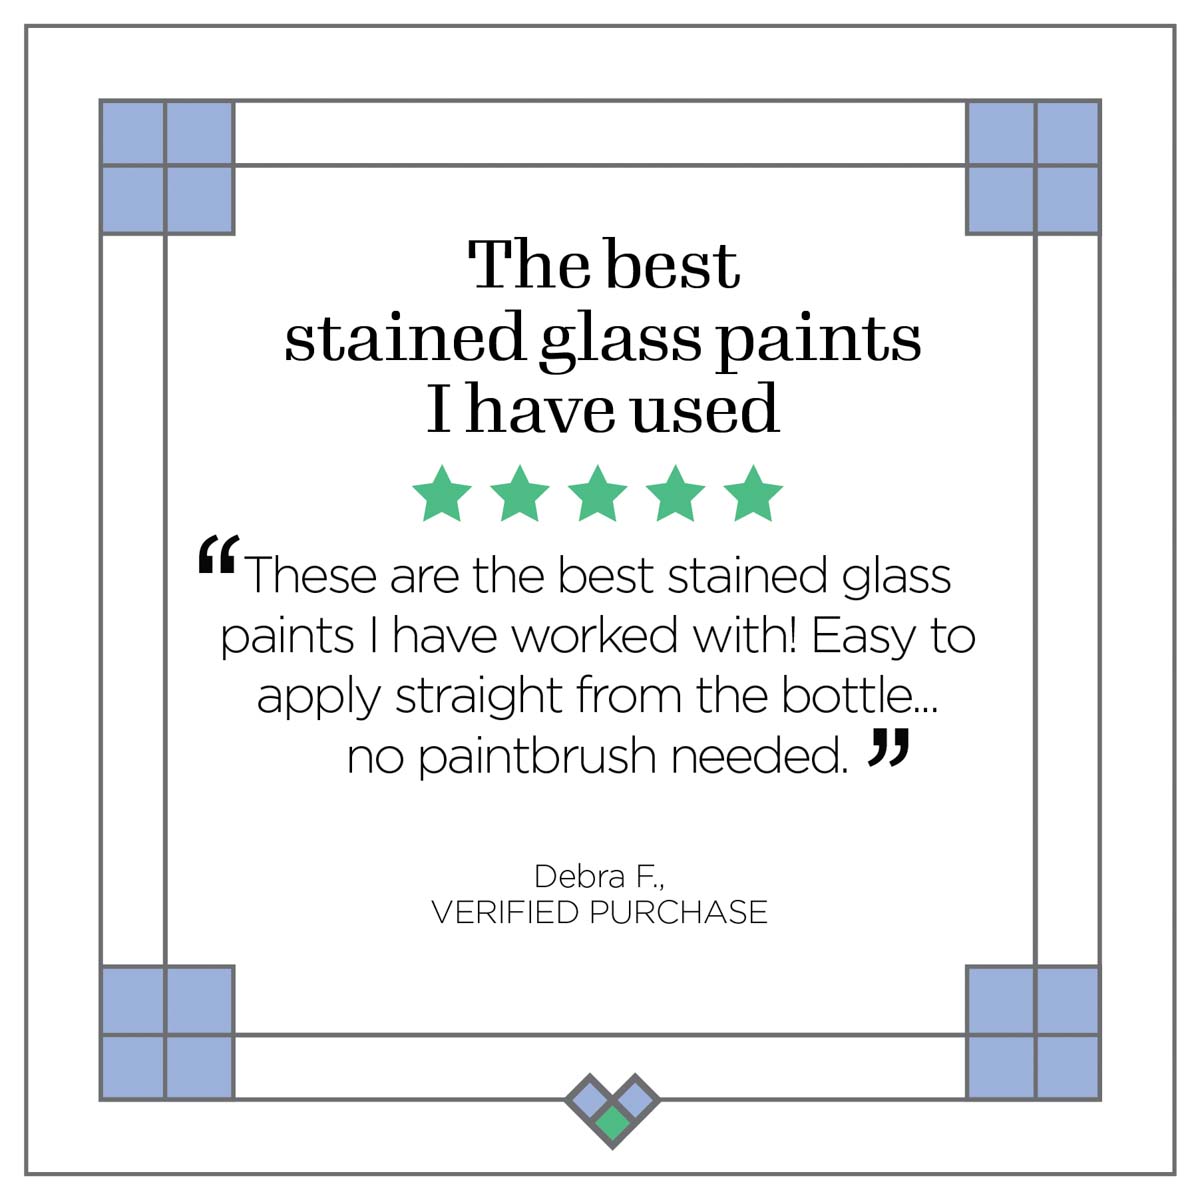 Gallery Glass ® Shimmer™ Stained Glass Effect Paint - Hologram, 2 oz. - 19687